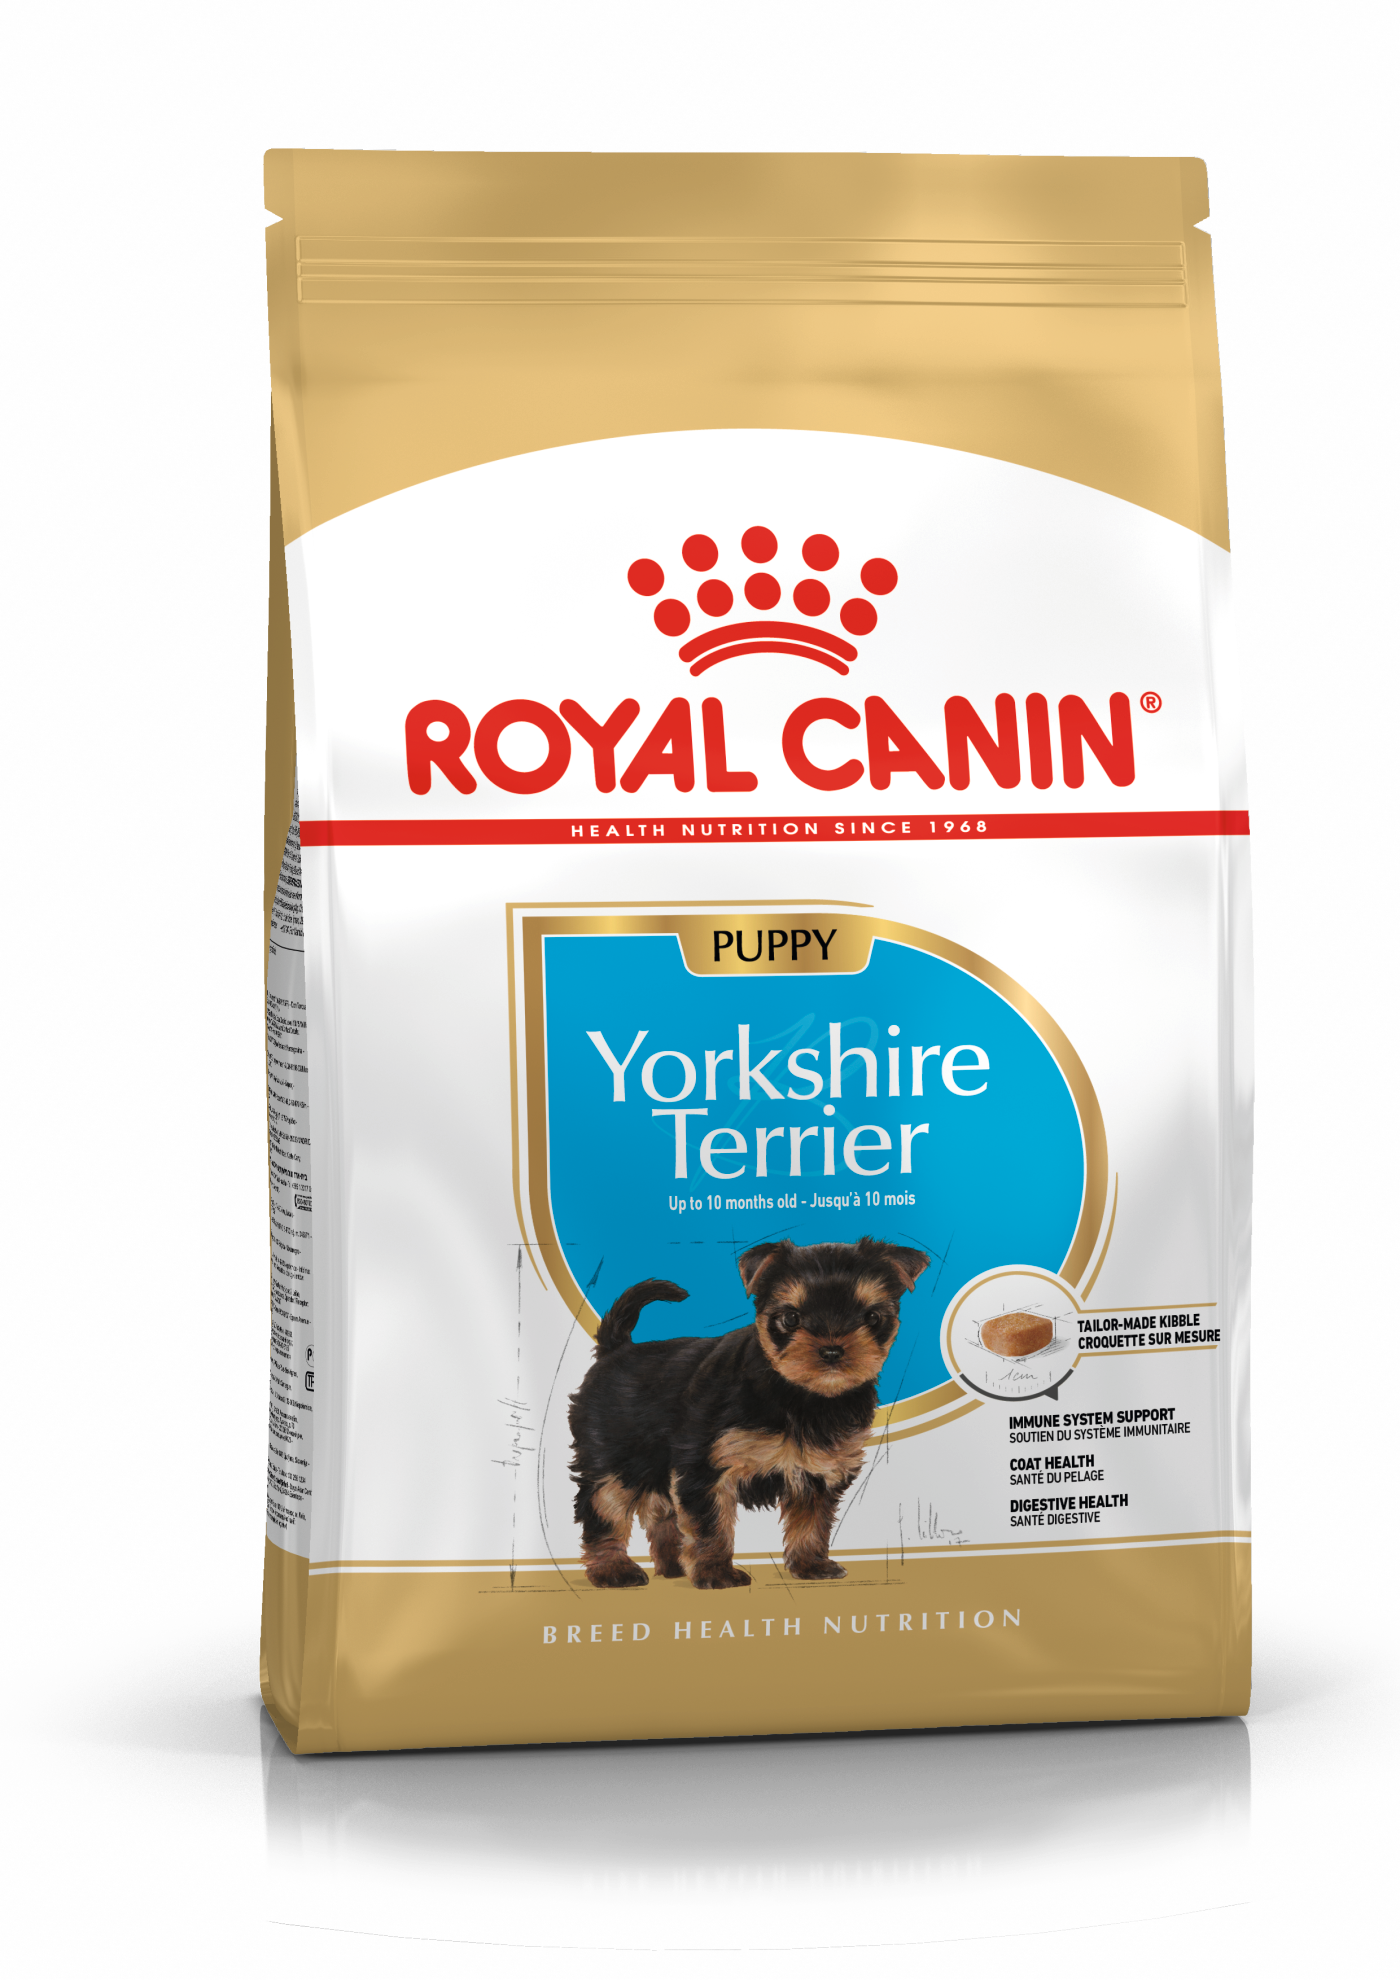 royal canin yorkshire terrier ingredients